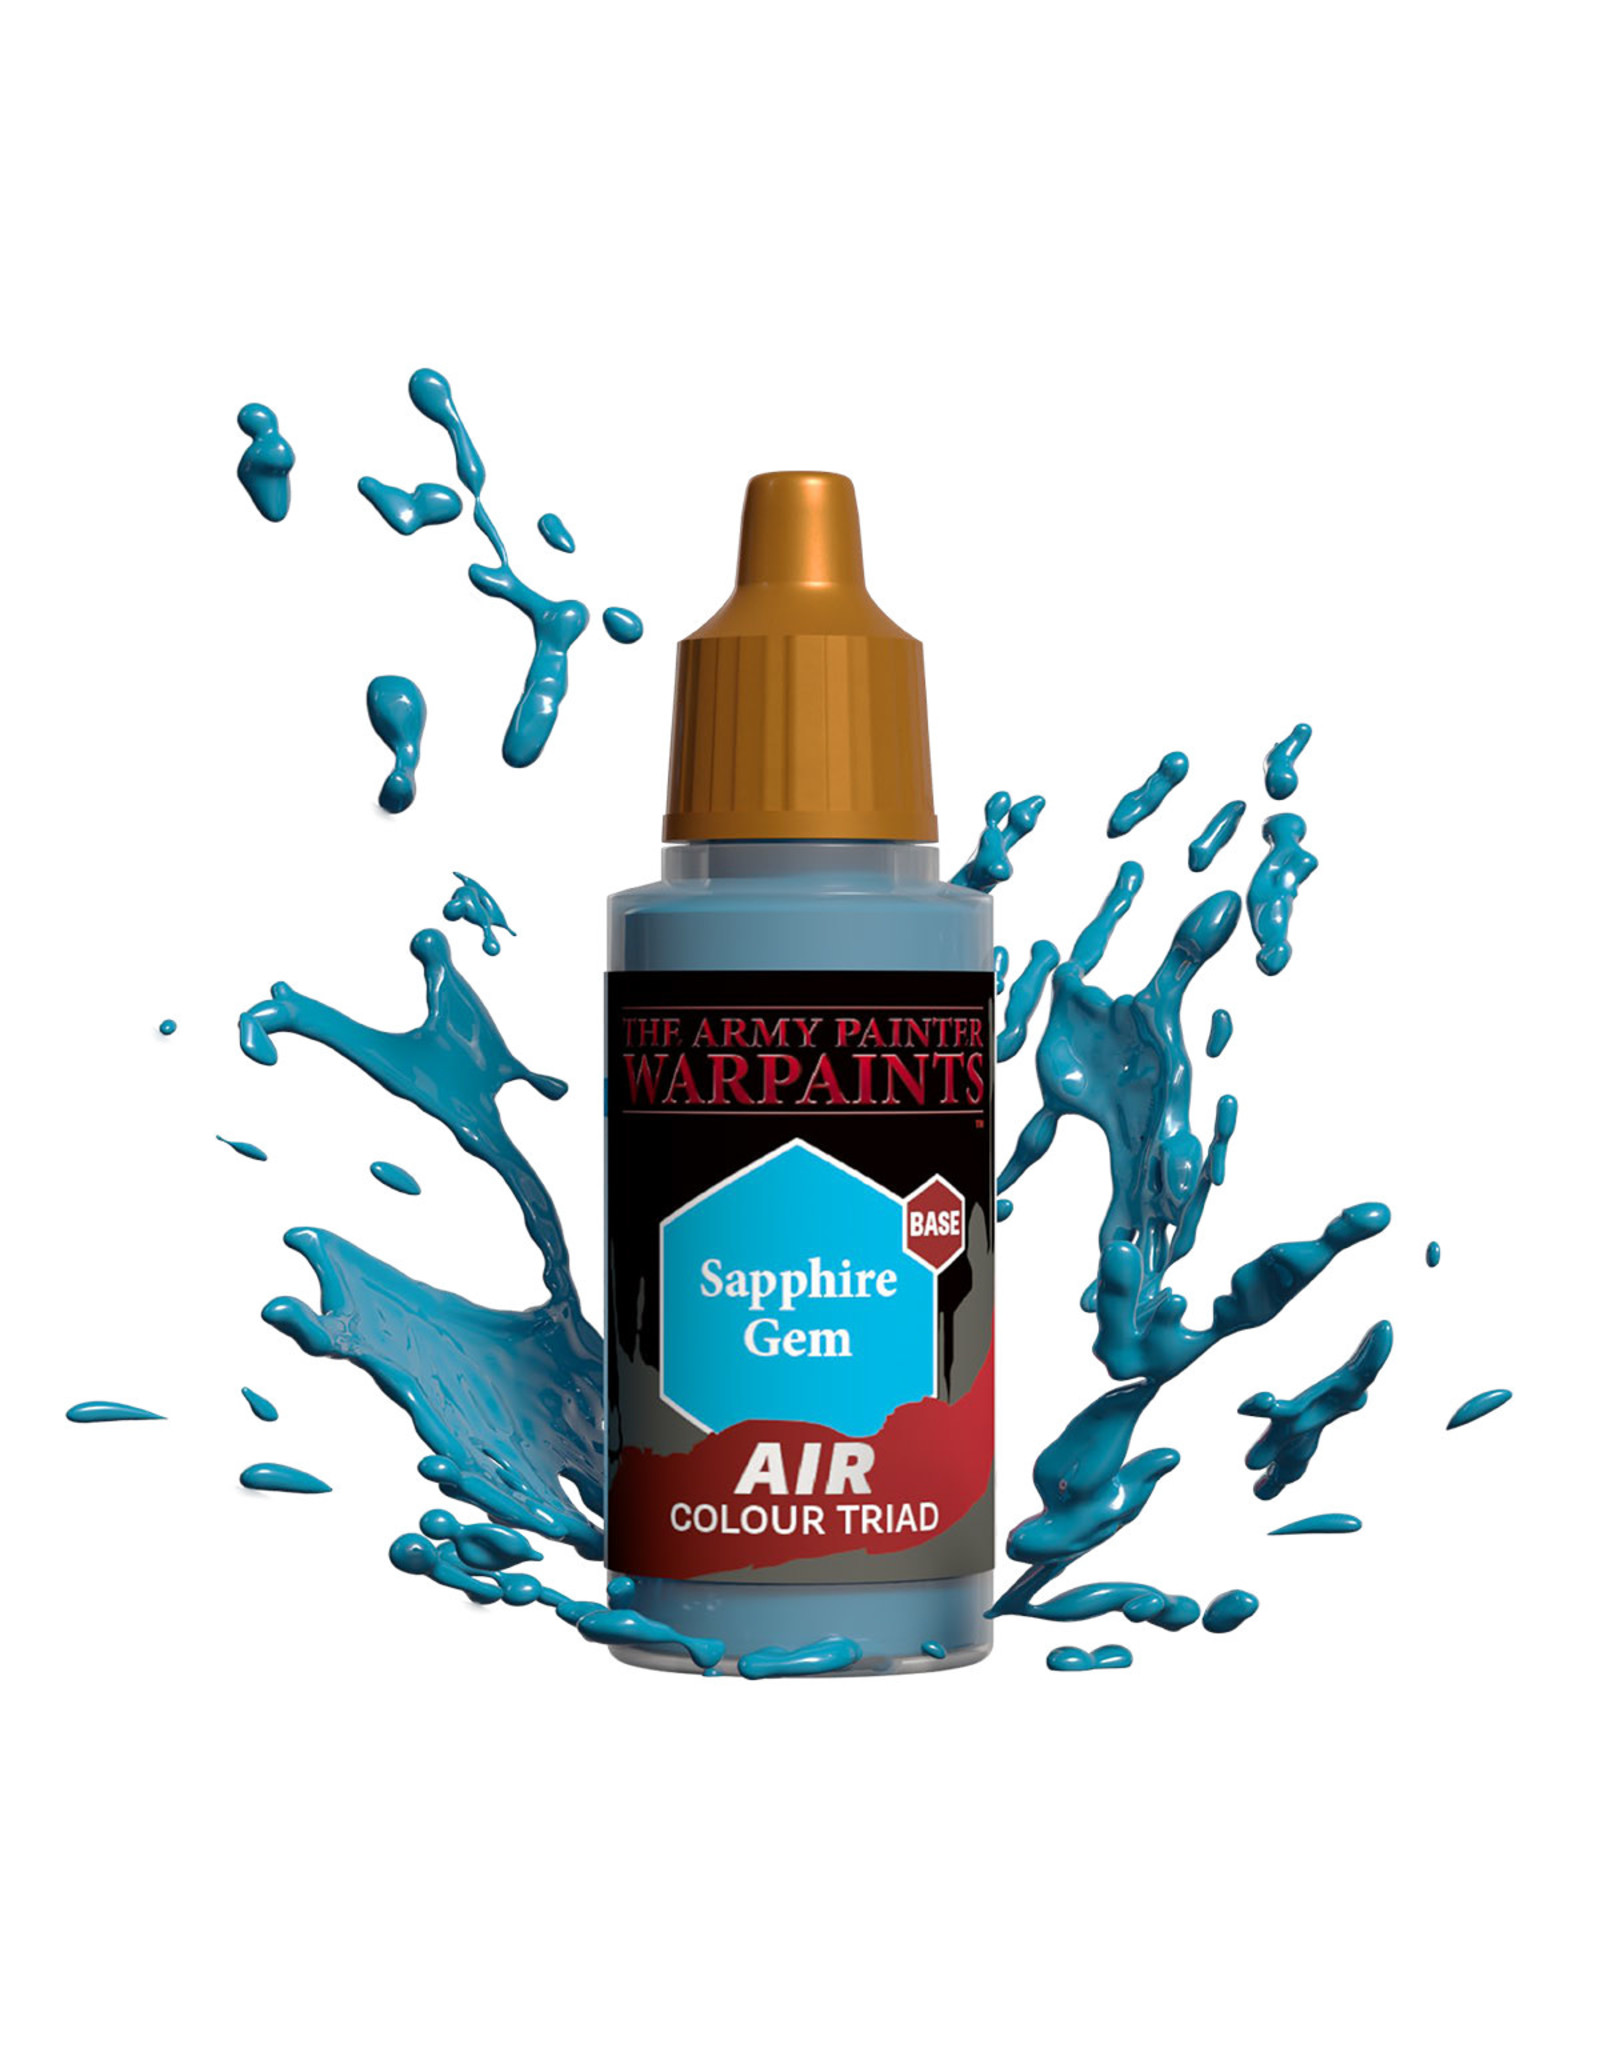 The Army Painter The Army Painter Warpaints Air: Sapphire Gem